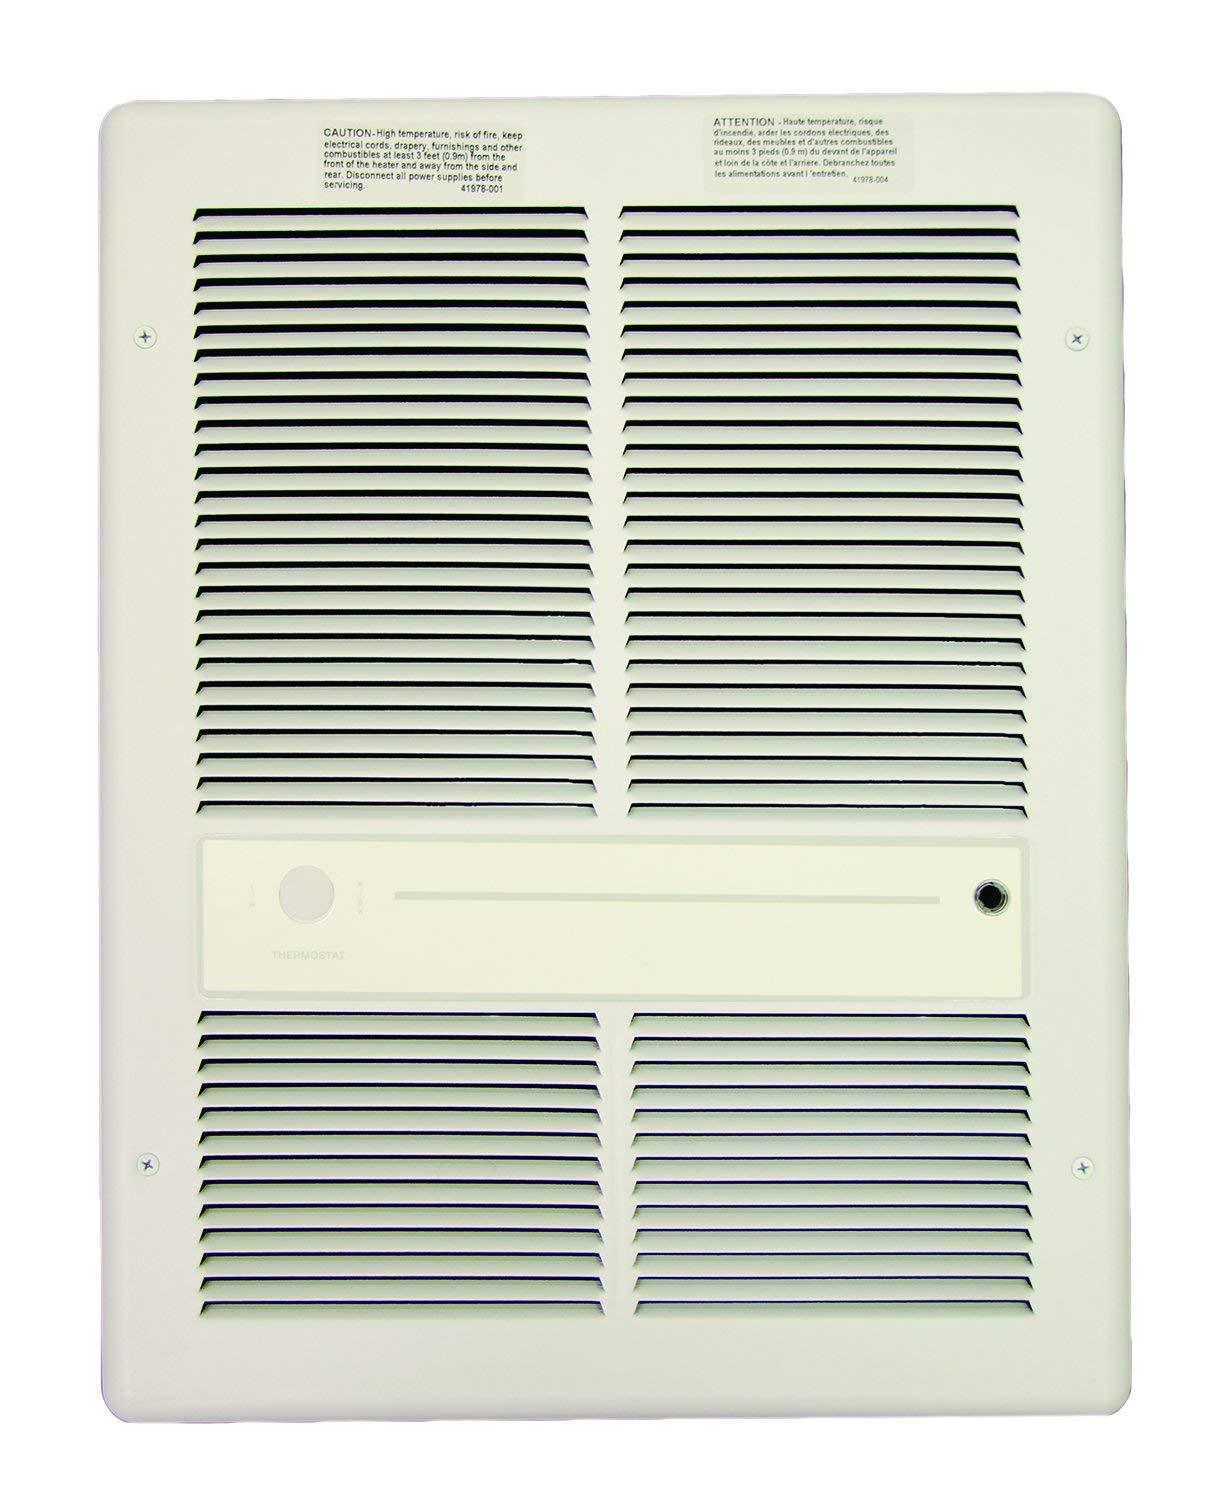 TPI 4800W 240V 3310 Series Fan Forced Wall Heater (White) - Without Summer Fan Switch - No Thermostat - H3317RPW